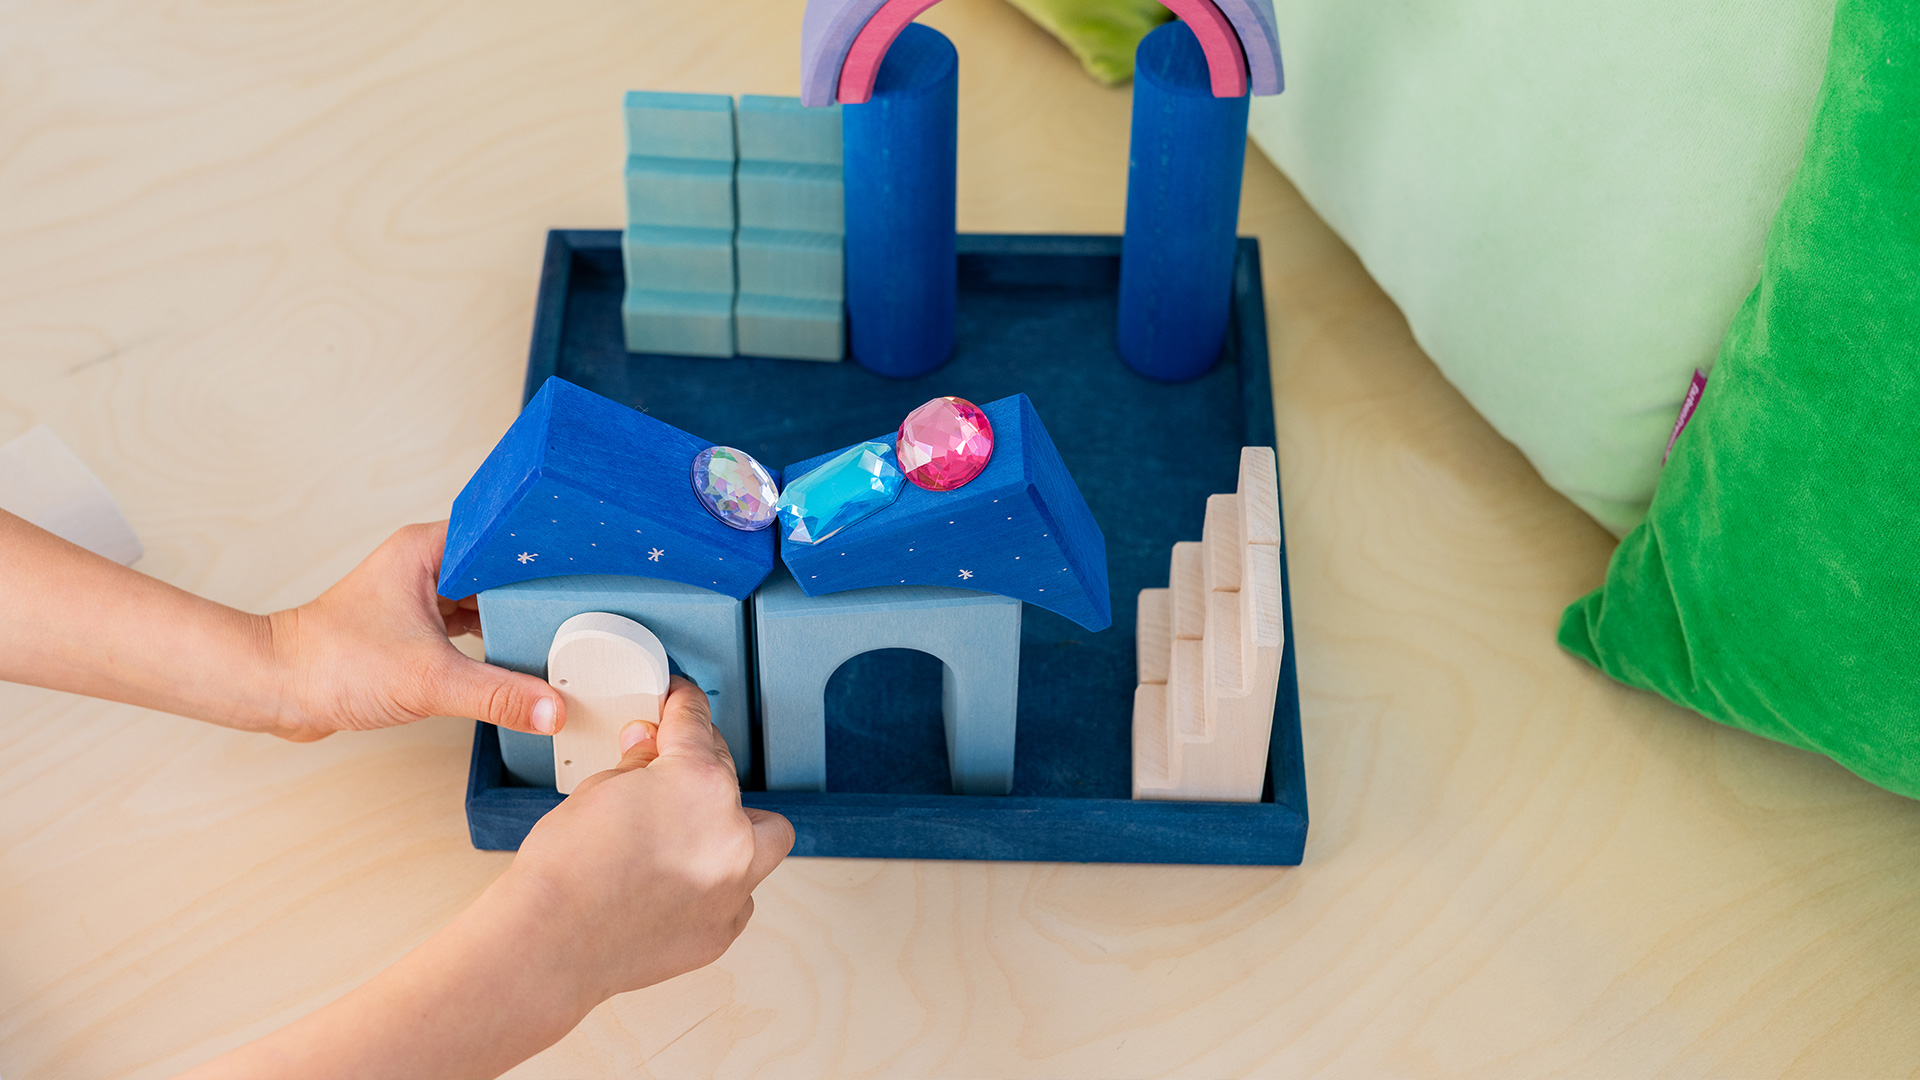 A castle built out of wooden building blocks with a child's hands